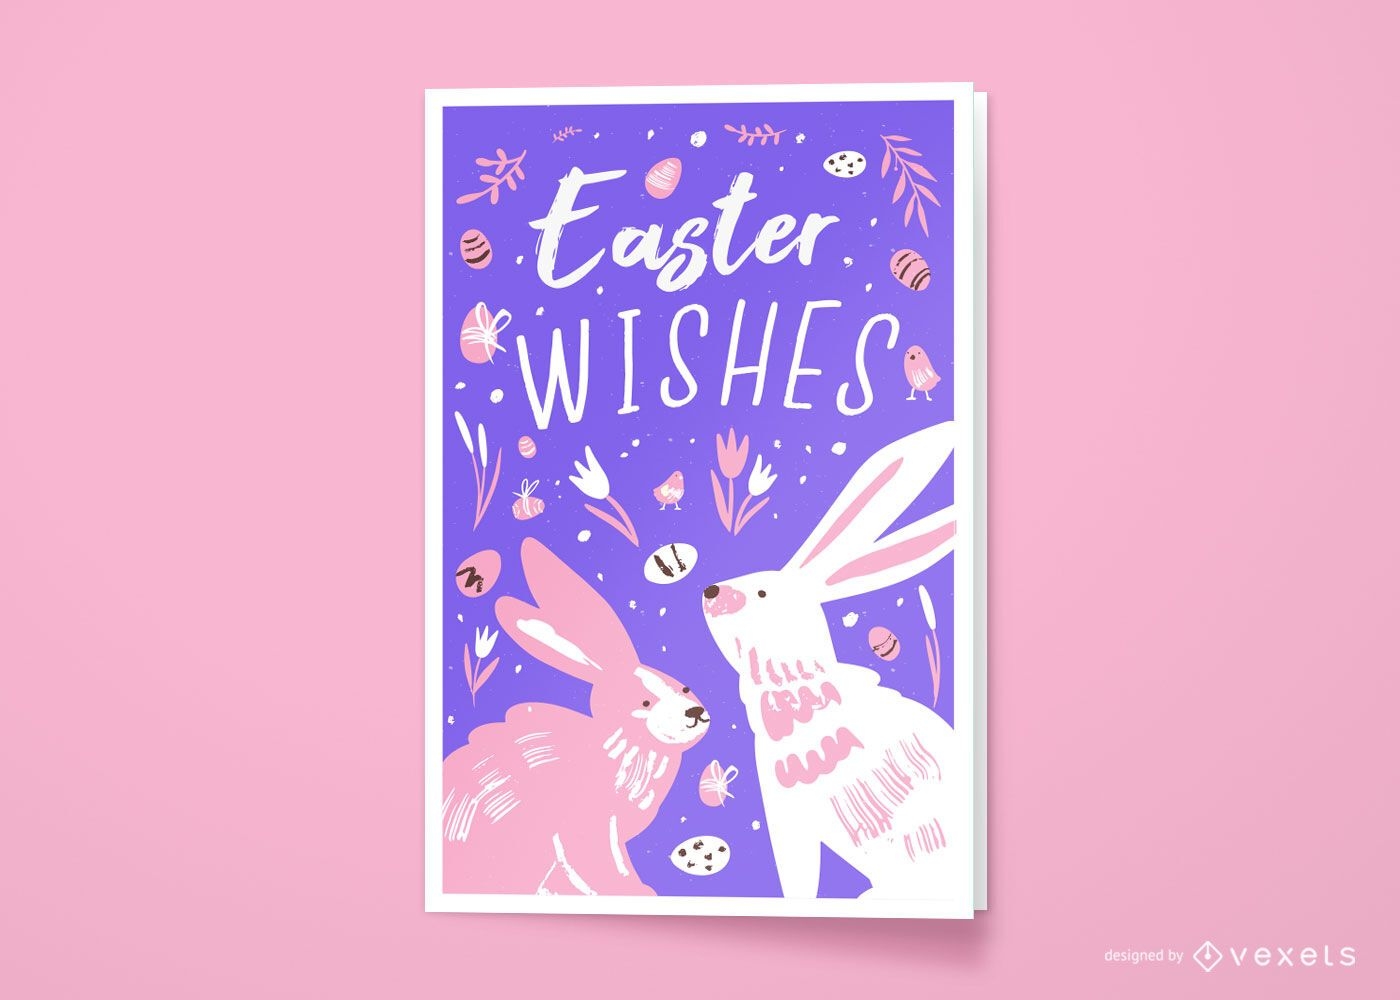 Easter wishes greeting card design